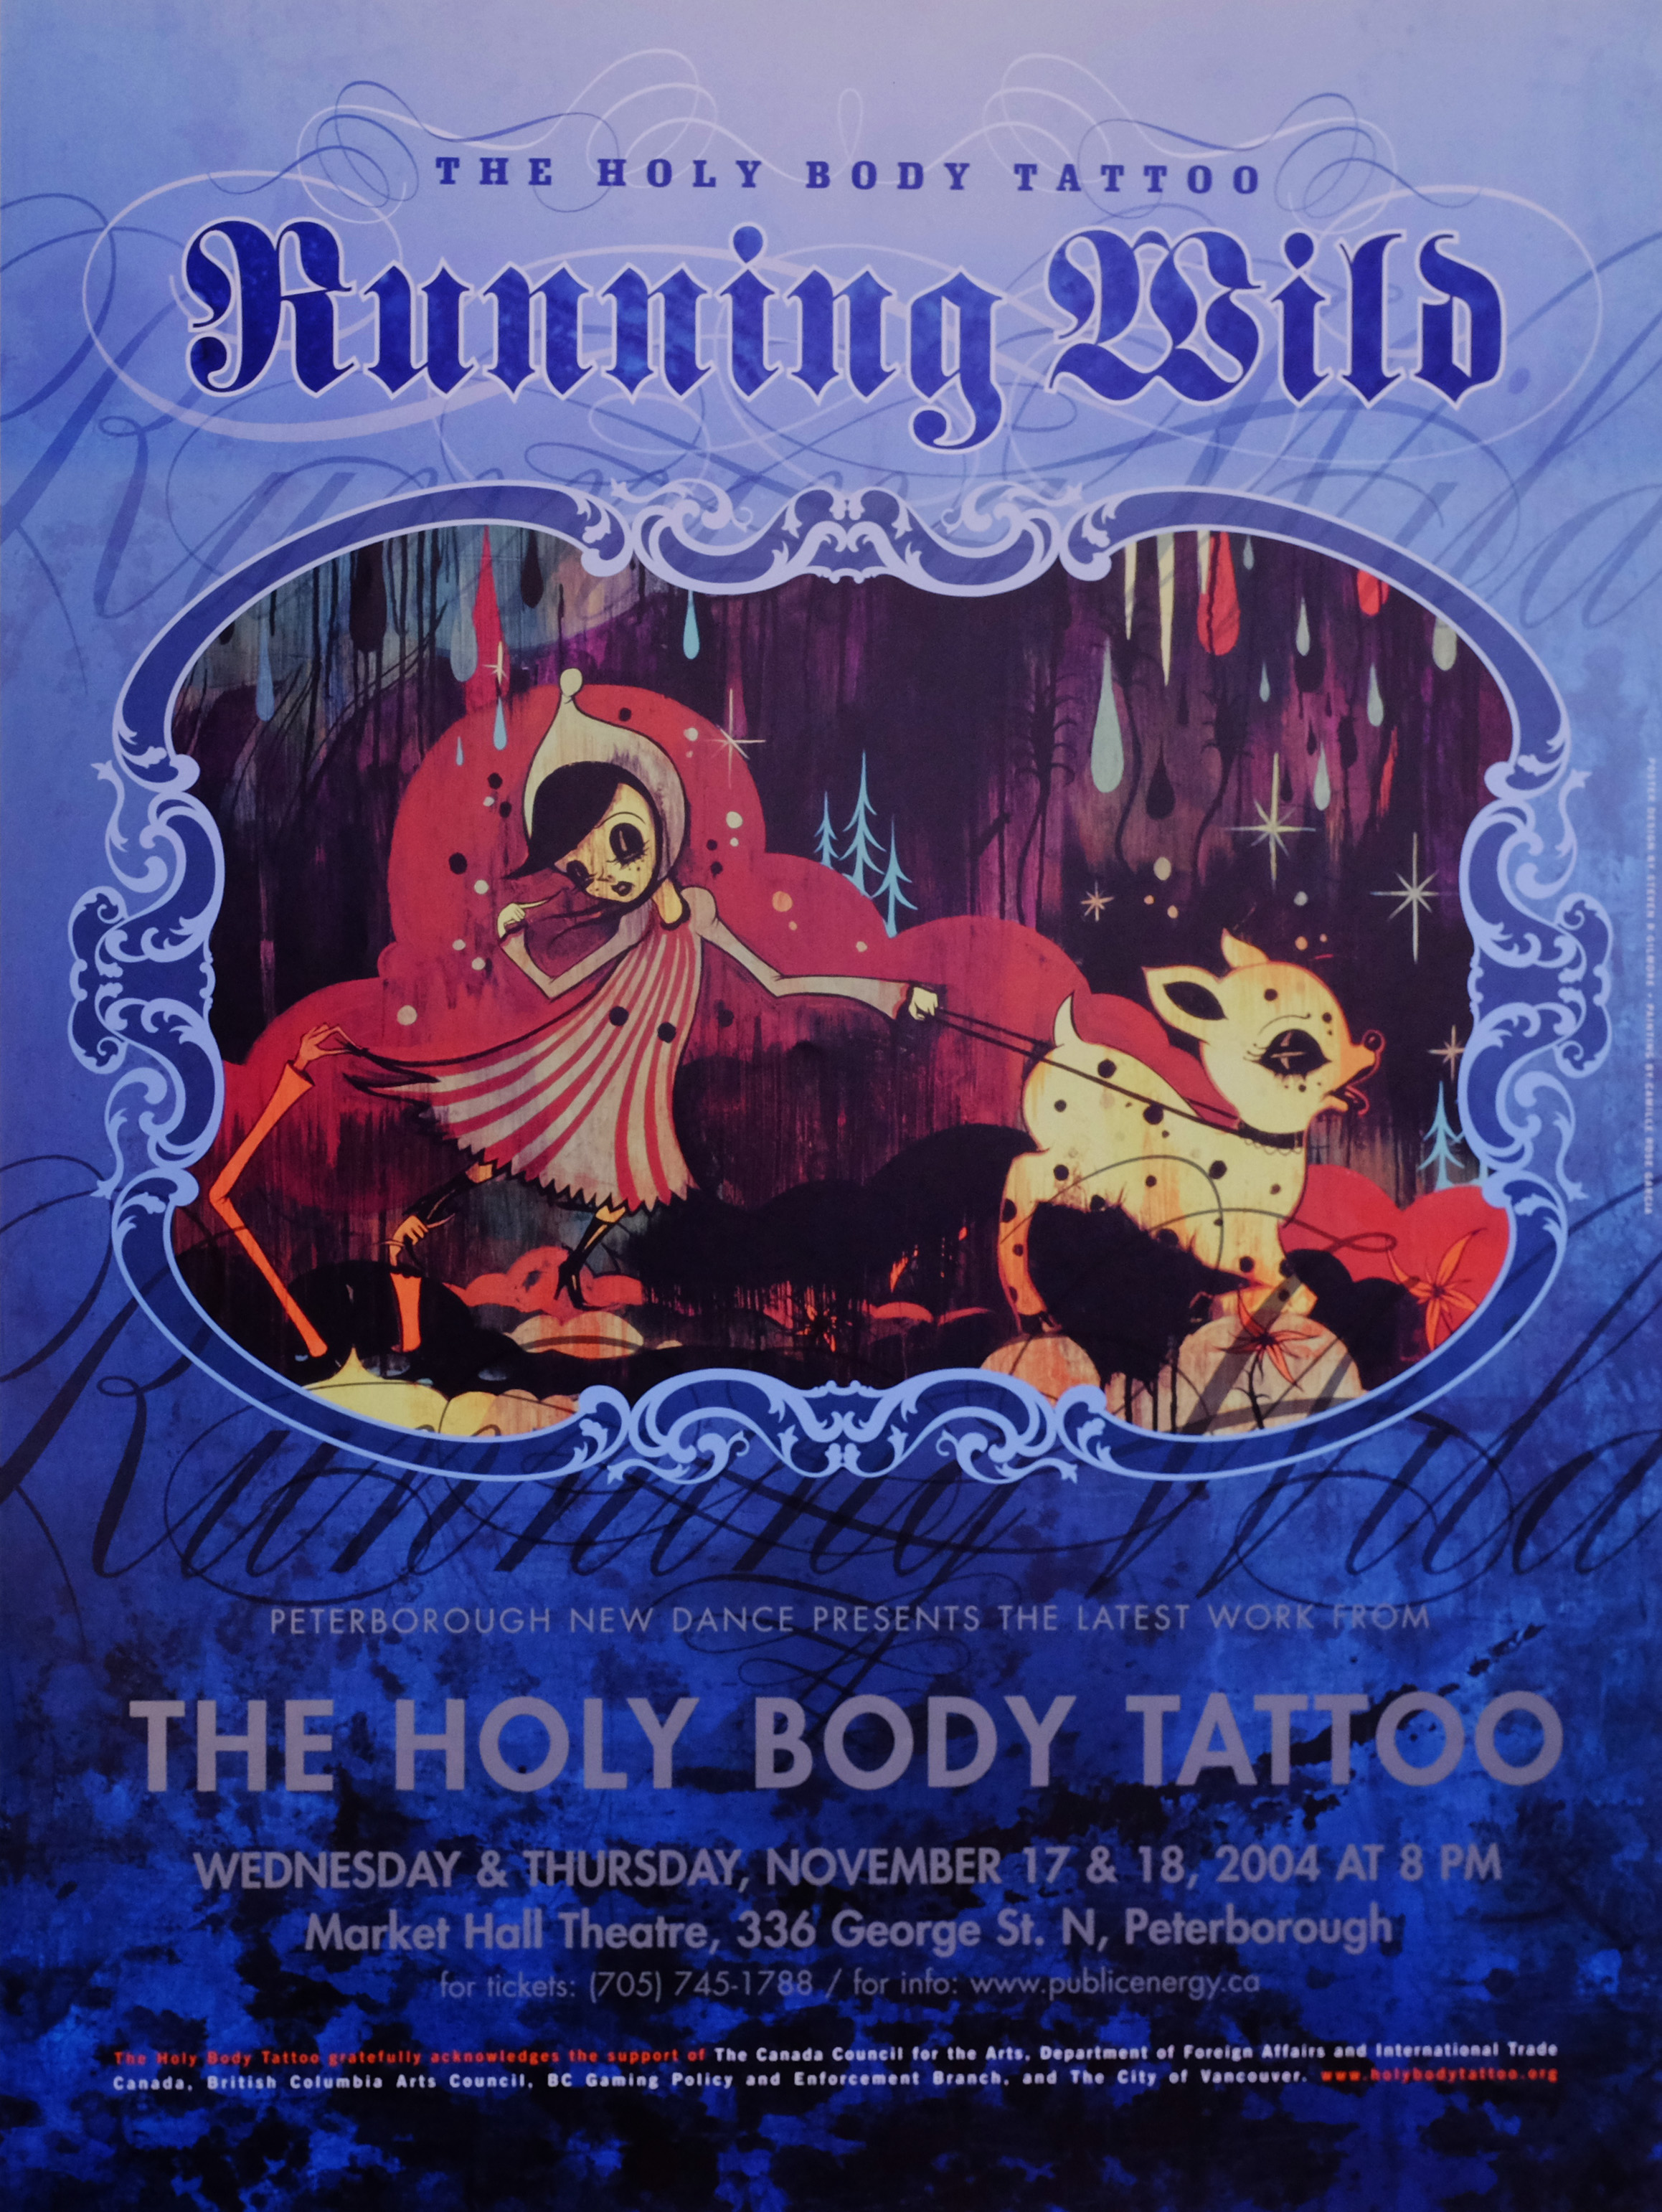 Running Wild Poster for The Holy Body Tattoo - Running Wild in the photo.